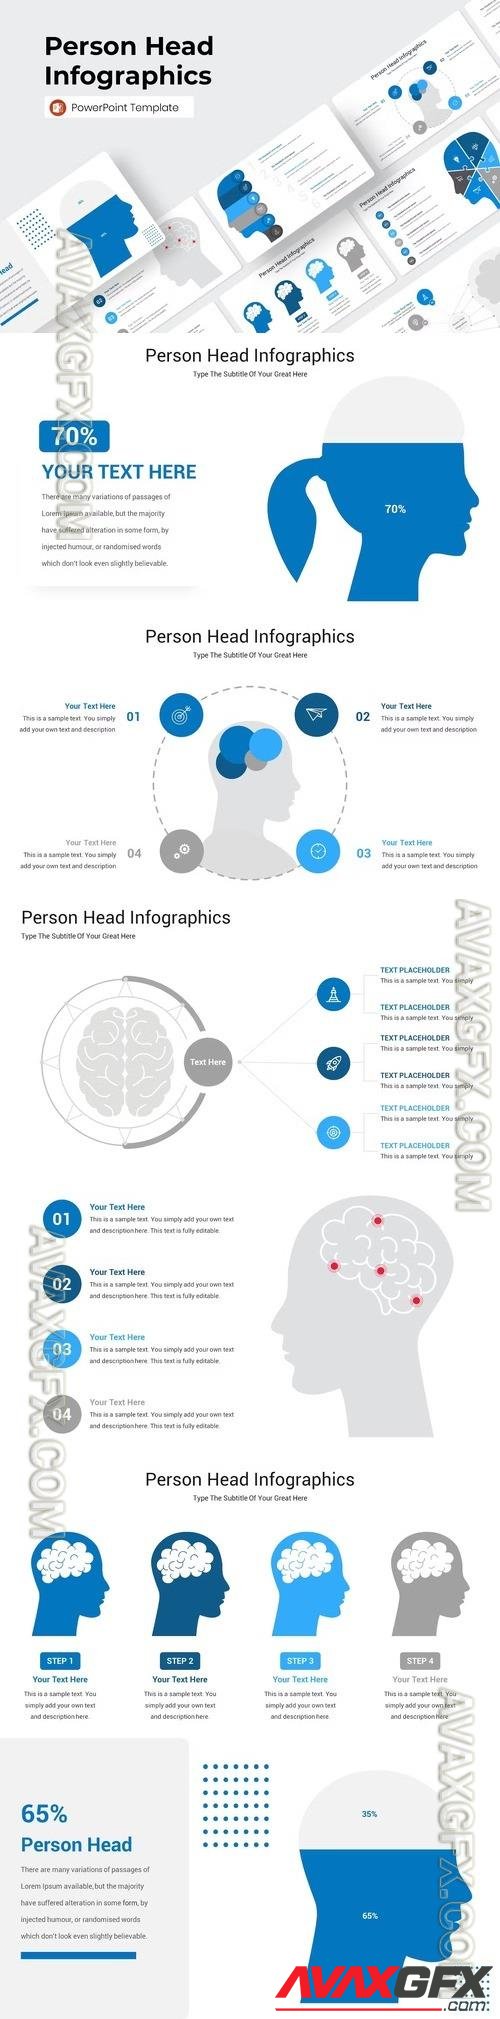 Person Head Infographics PowerPoint Template [PPTX]